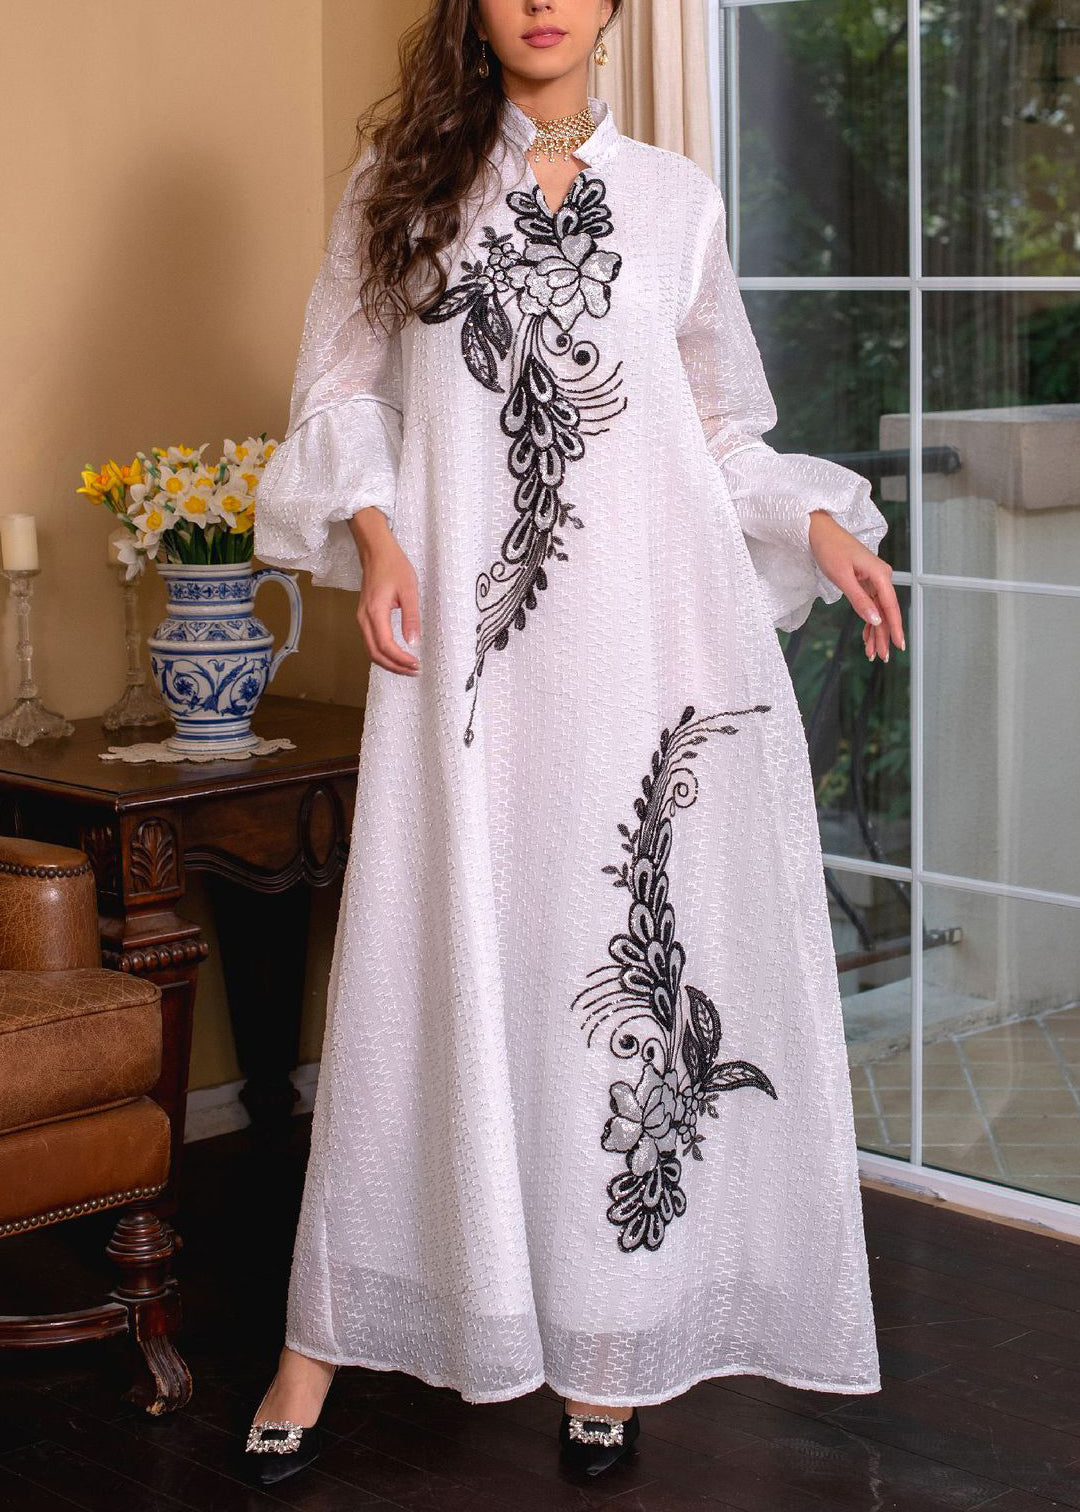 Loose White Embroidered Tie Waist Long Dresses Puff Sleeve